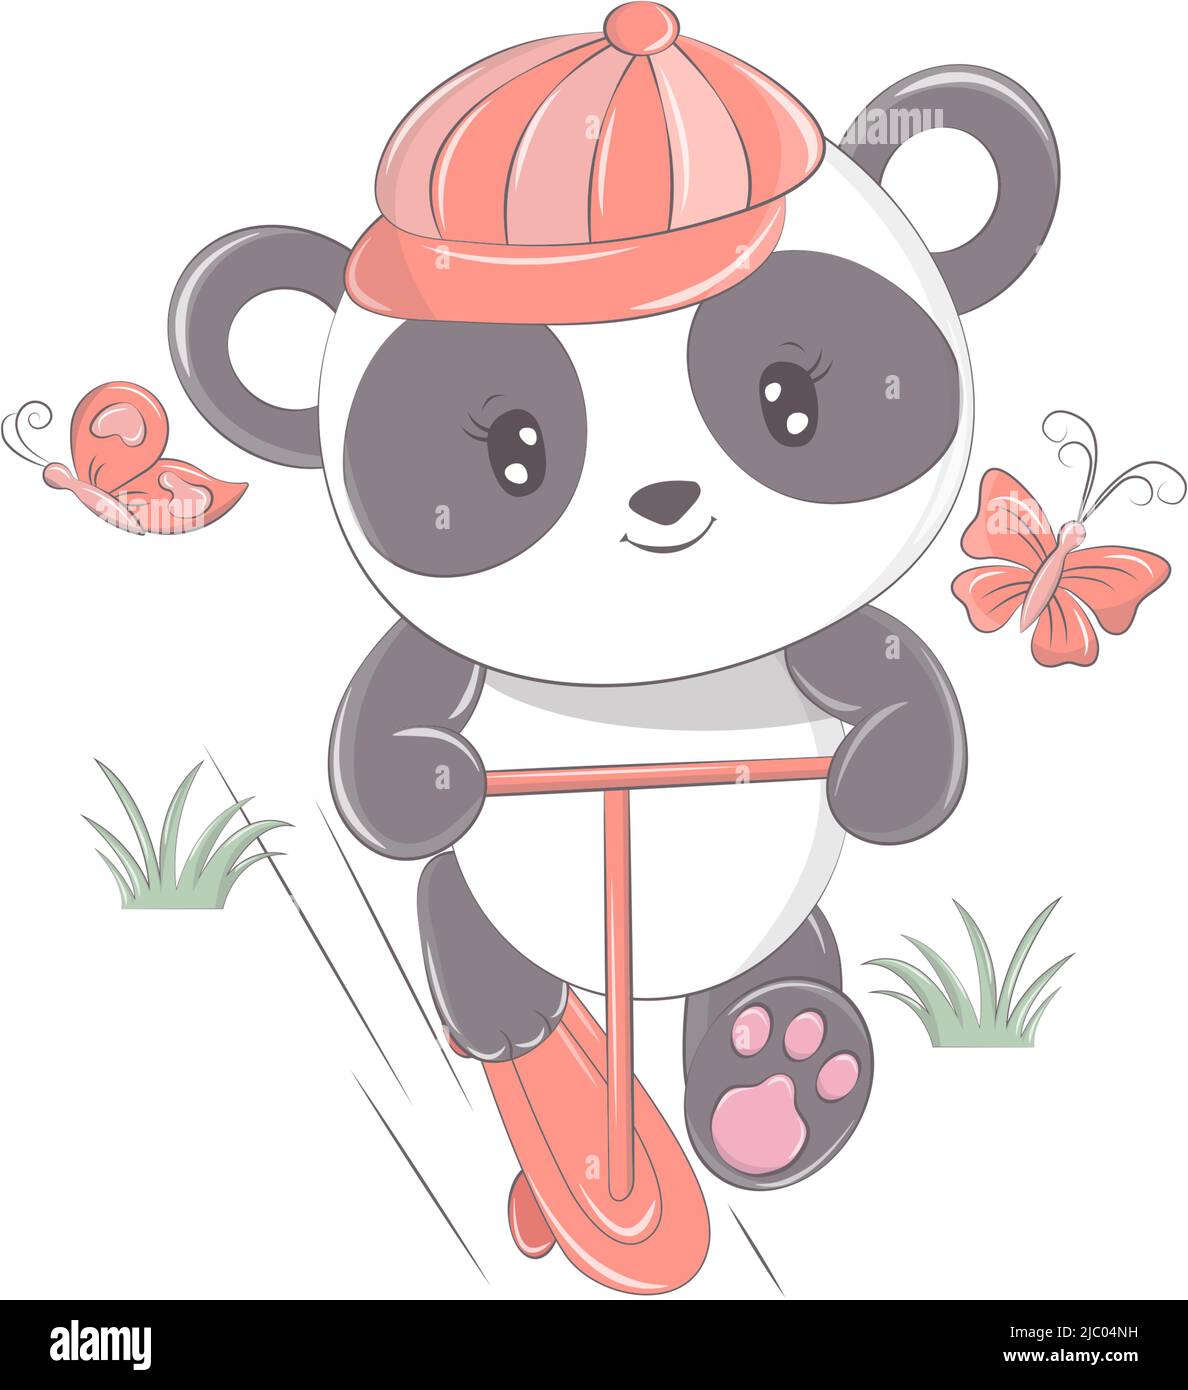 Panda in a funny cartoon style. Cute animal illustration for baby products. The animal in the vector smiles cutely and has beautiful eyes Stock Vector